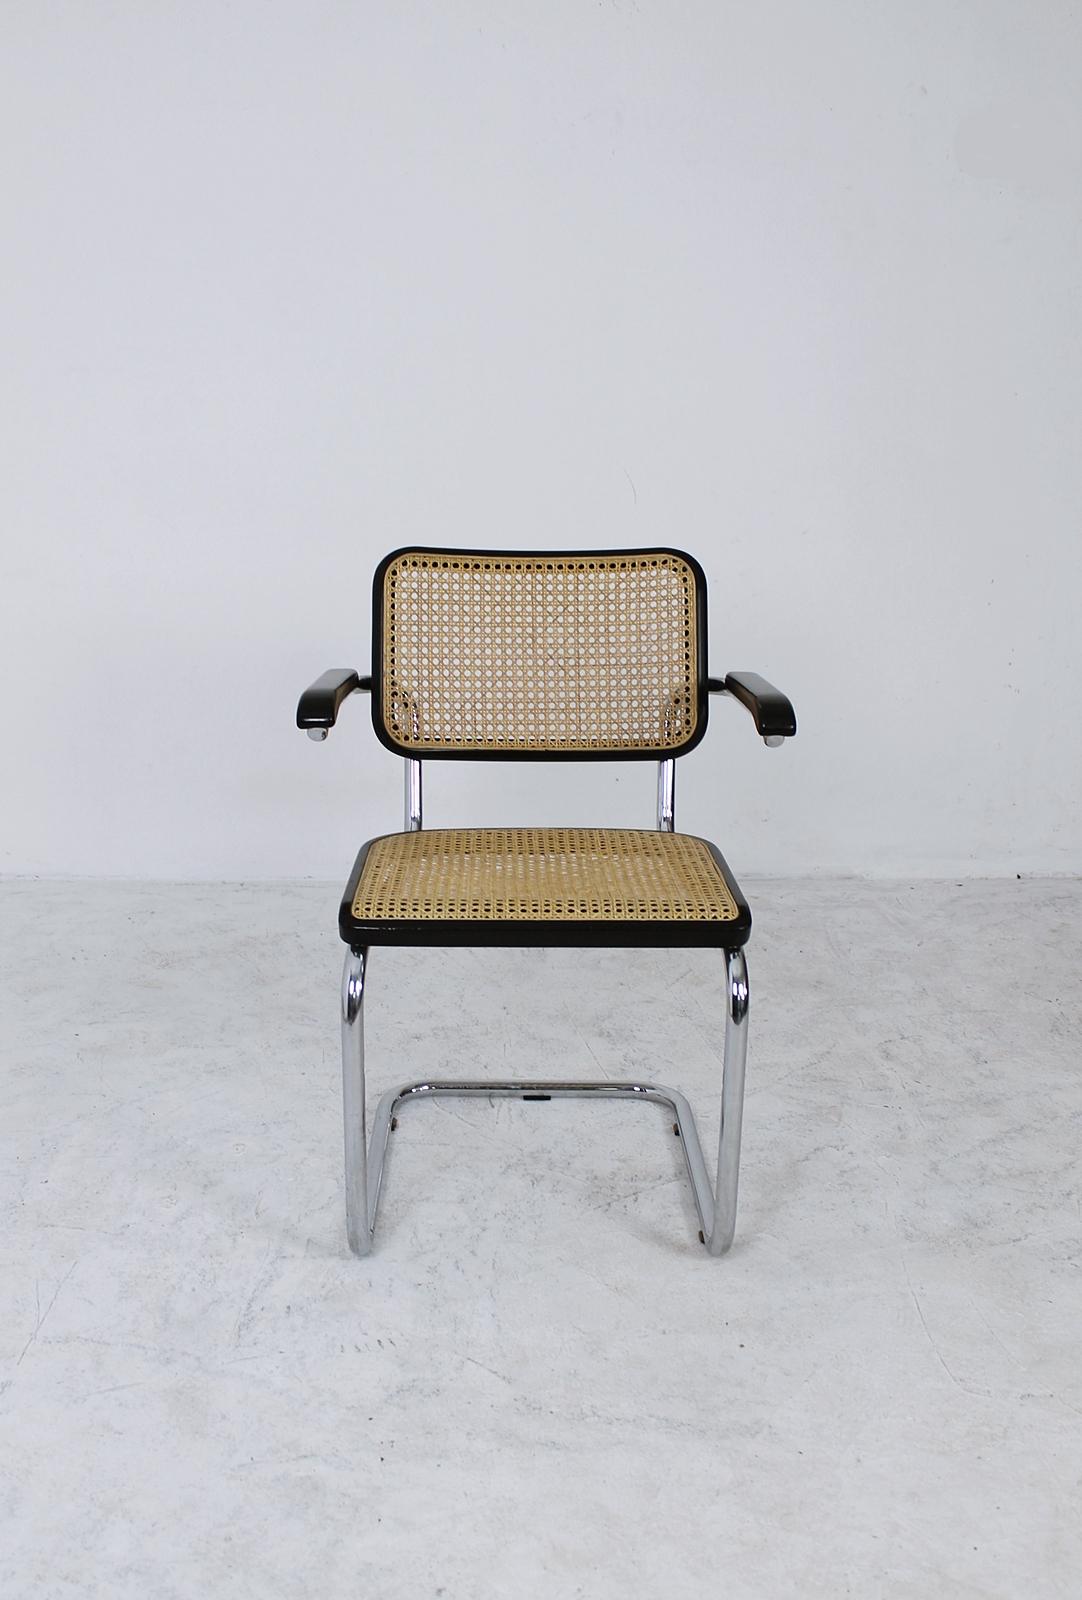 German Bauhaus Icon Thonet Cantilever Armchairs Model B64 by Marcel Breuer, 1927 For Sale